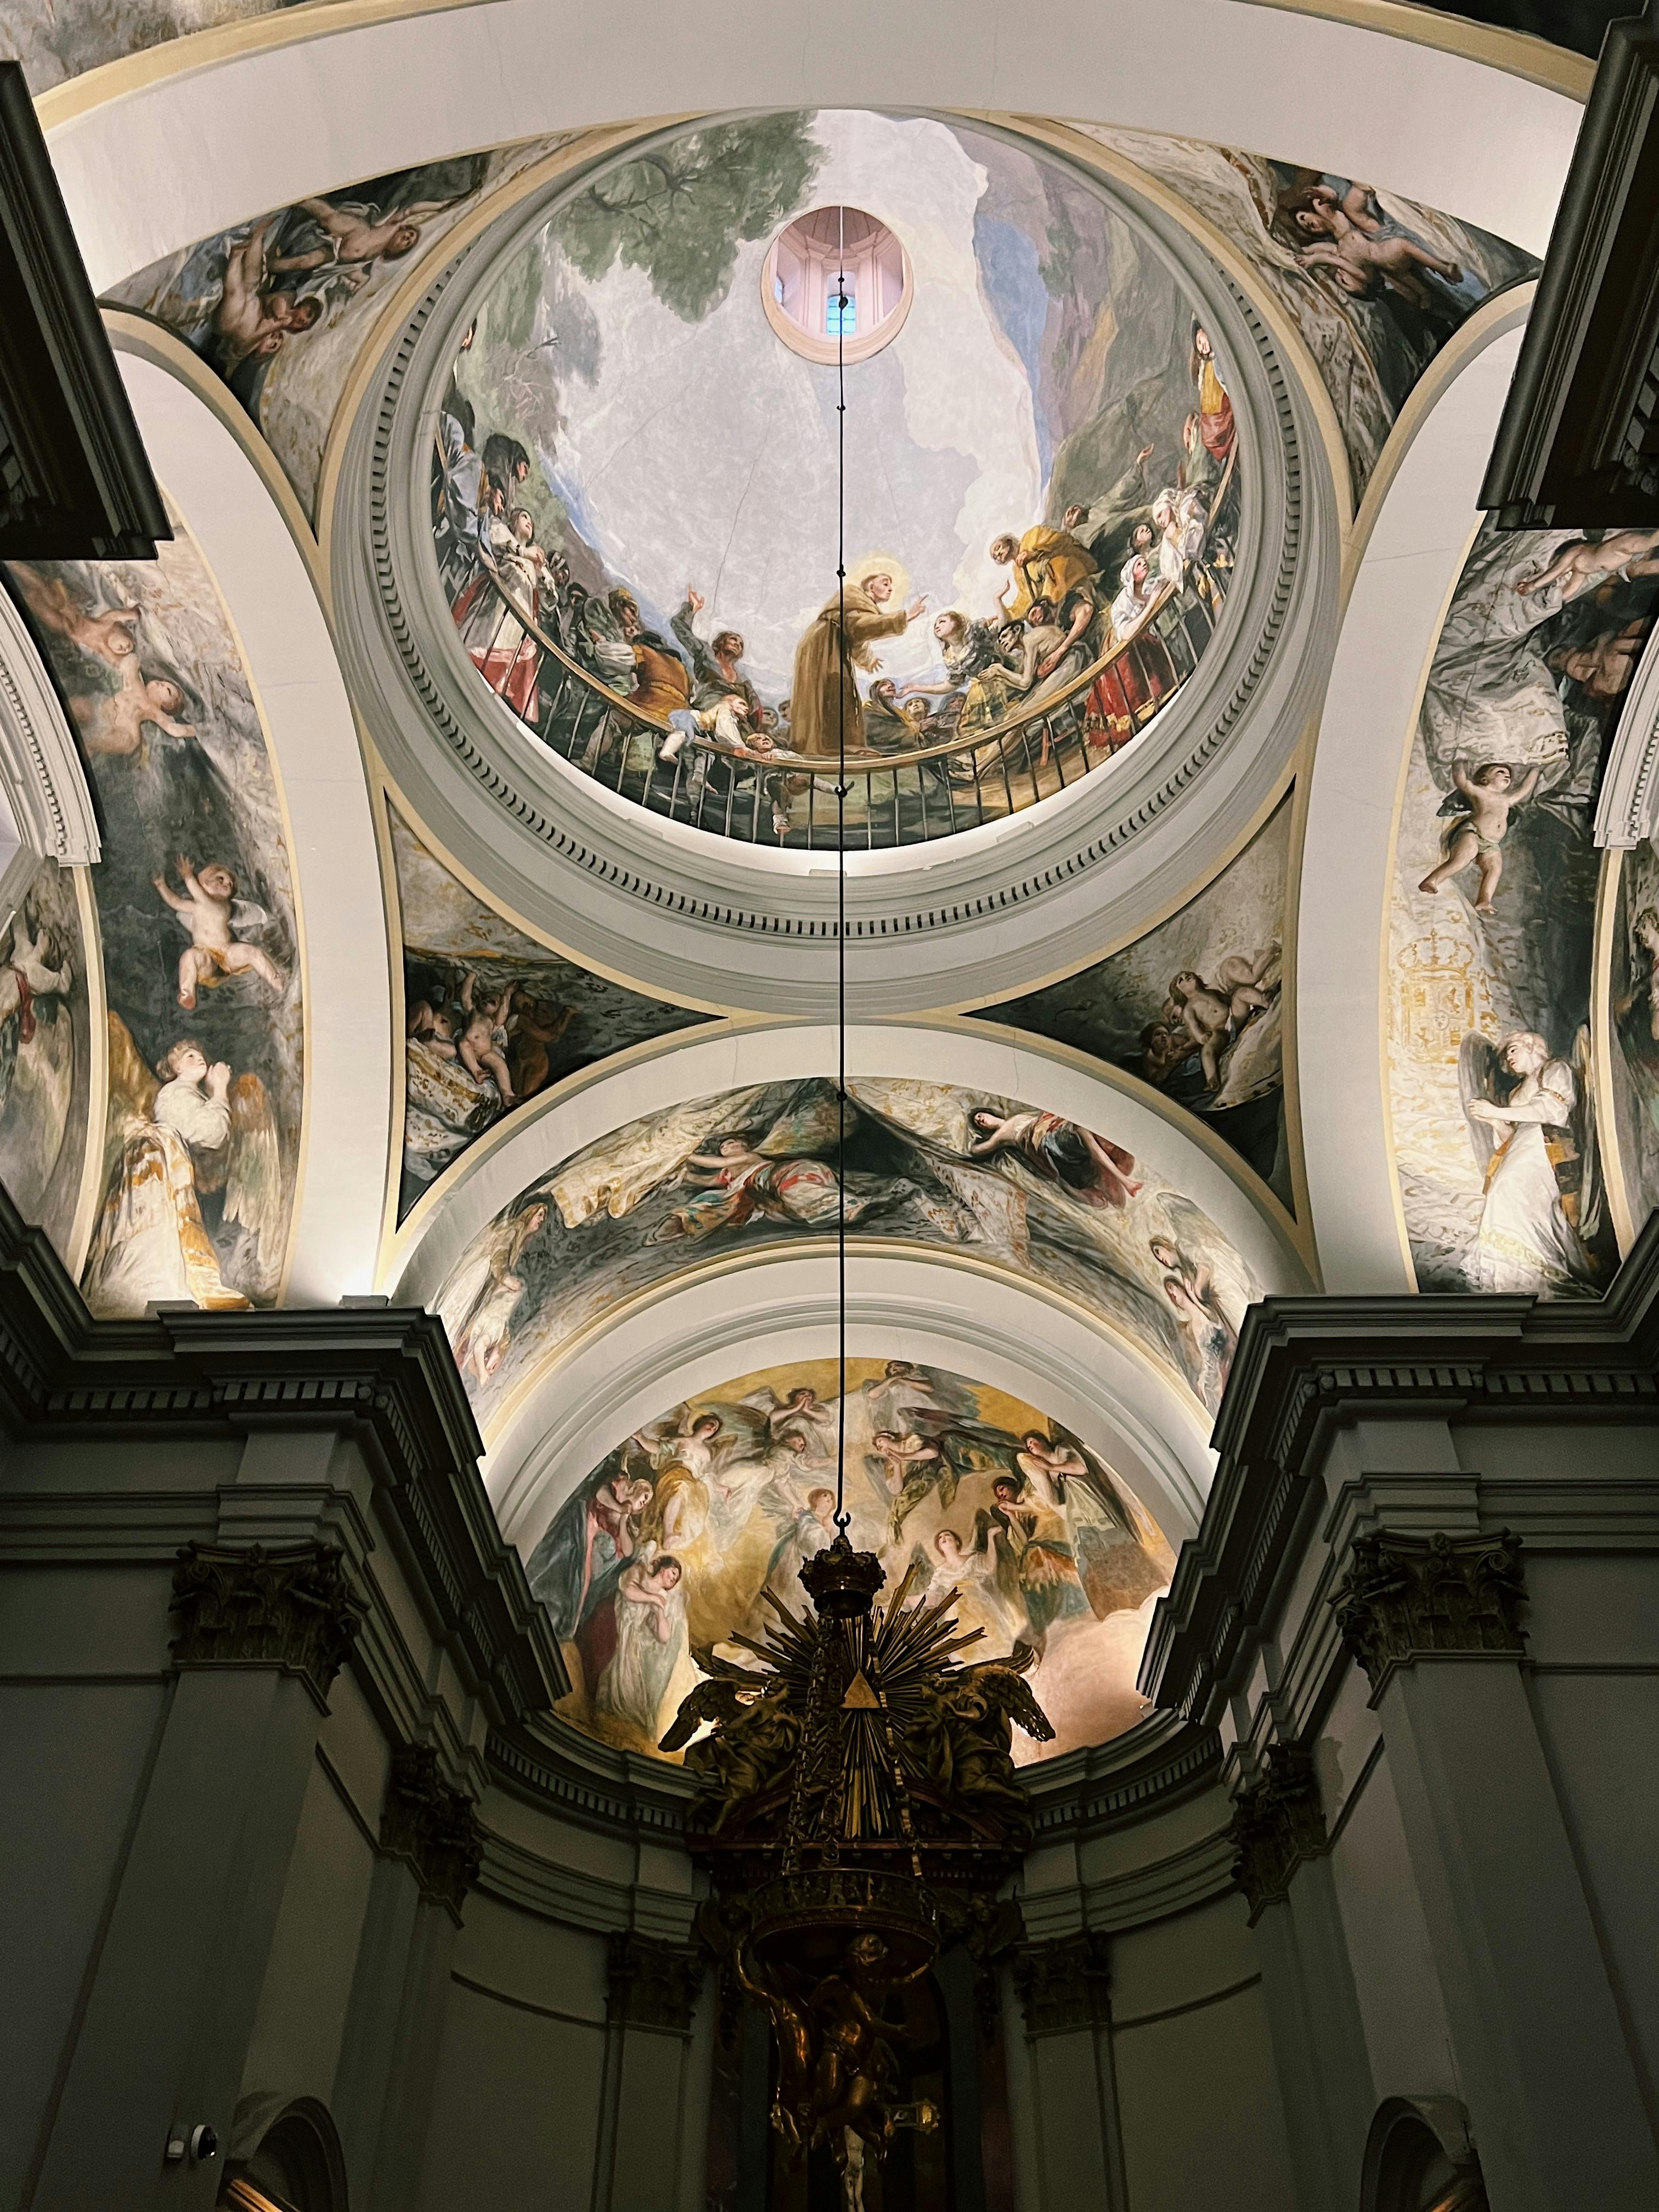 illuminated ceiling painting of a church